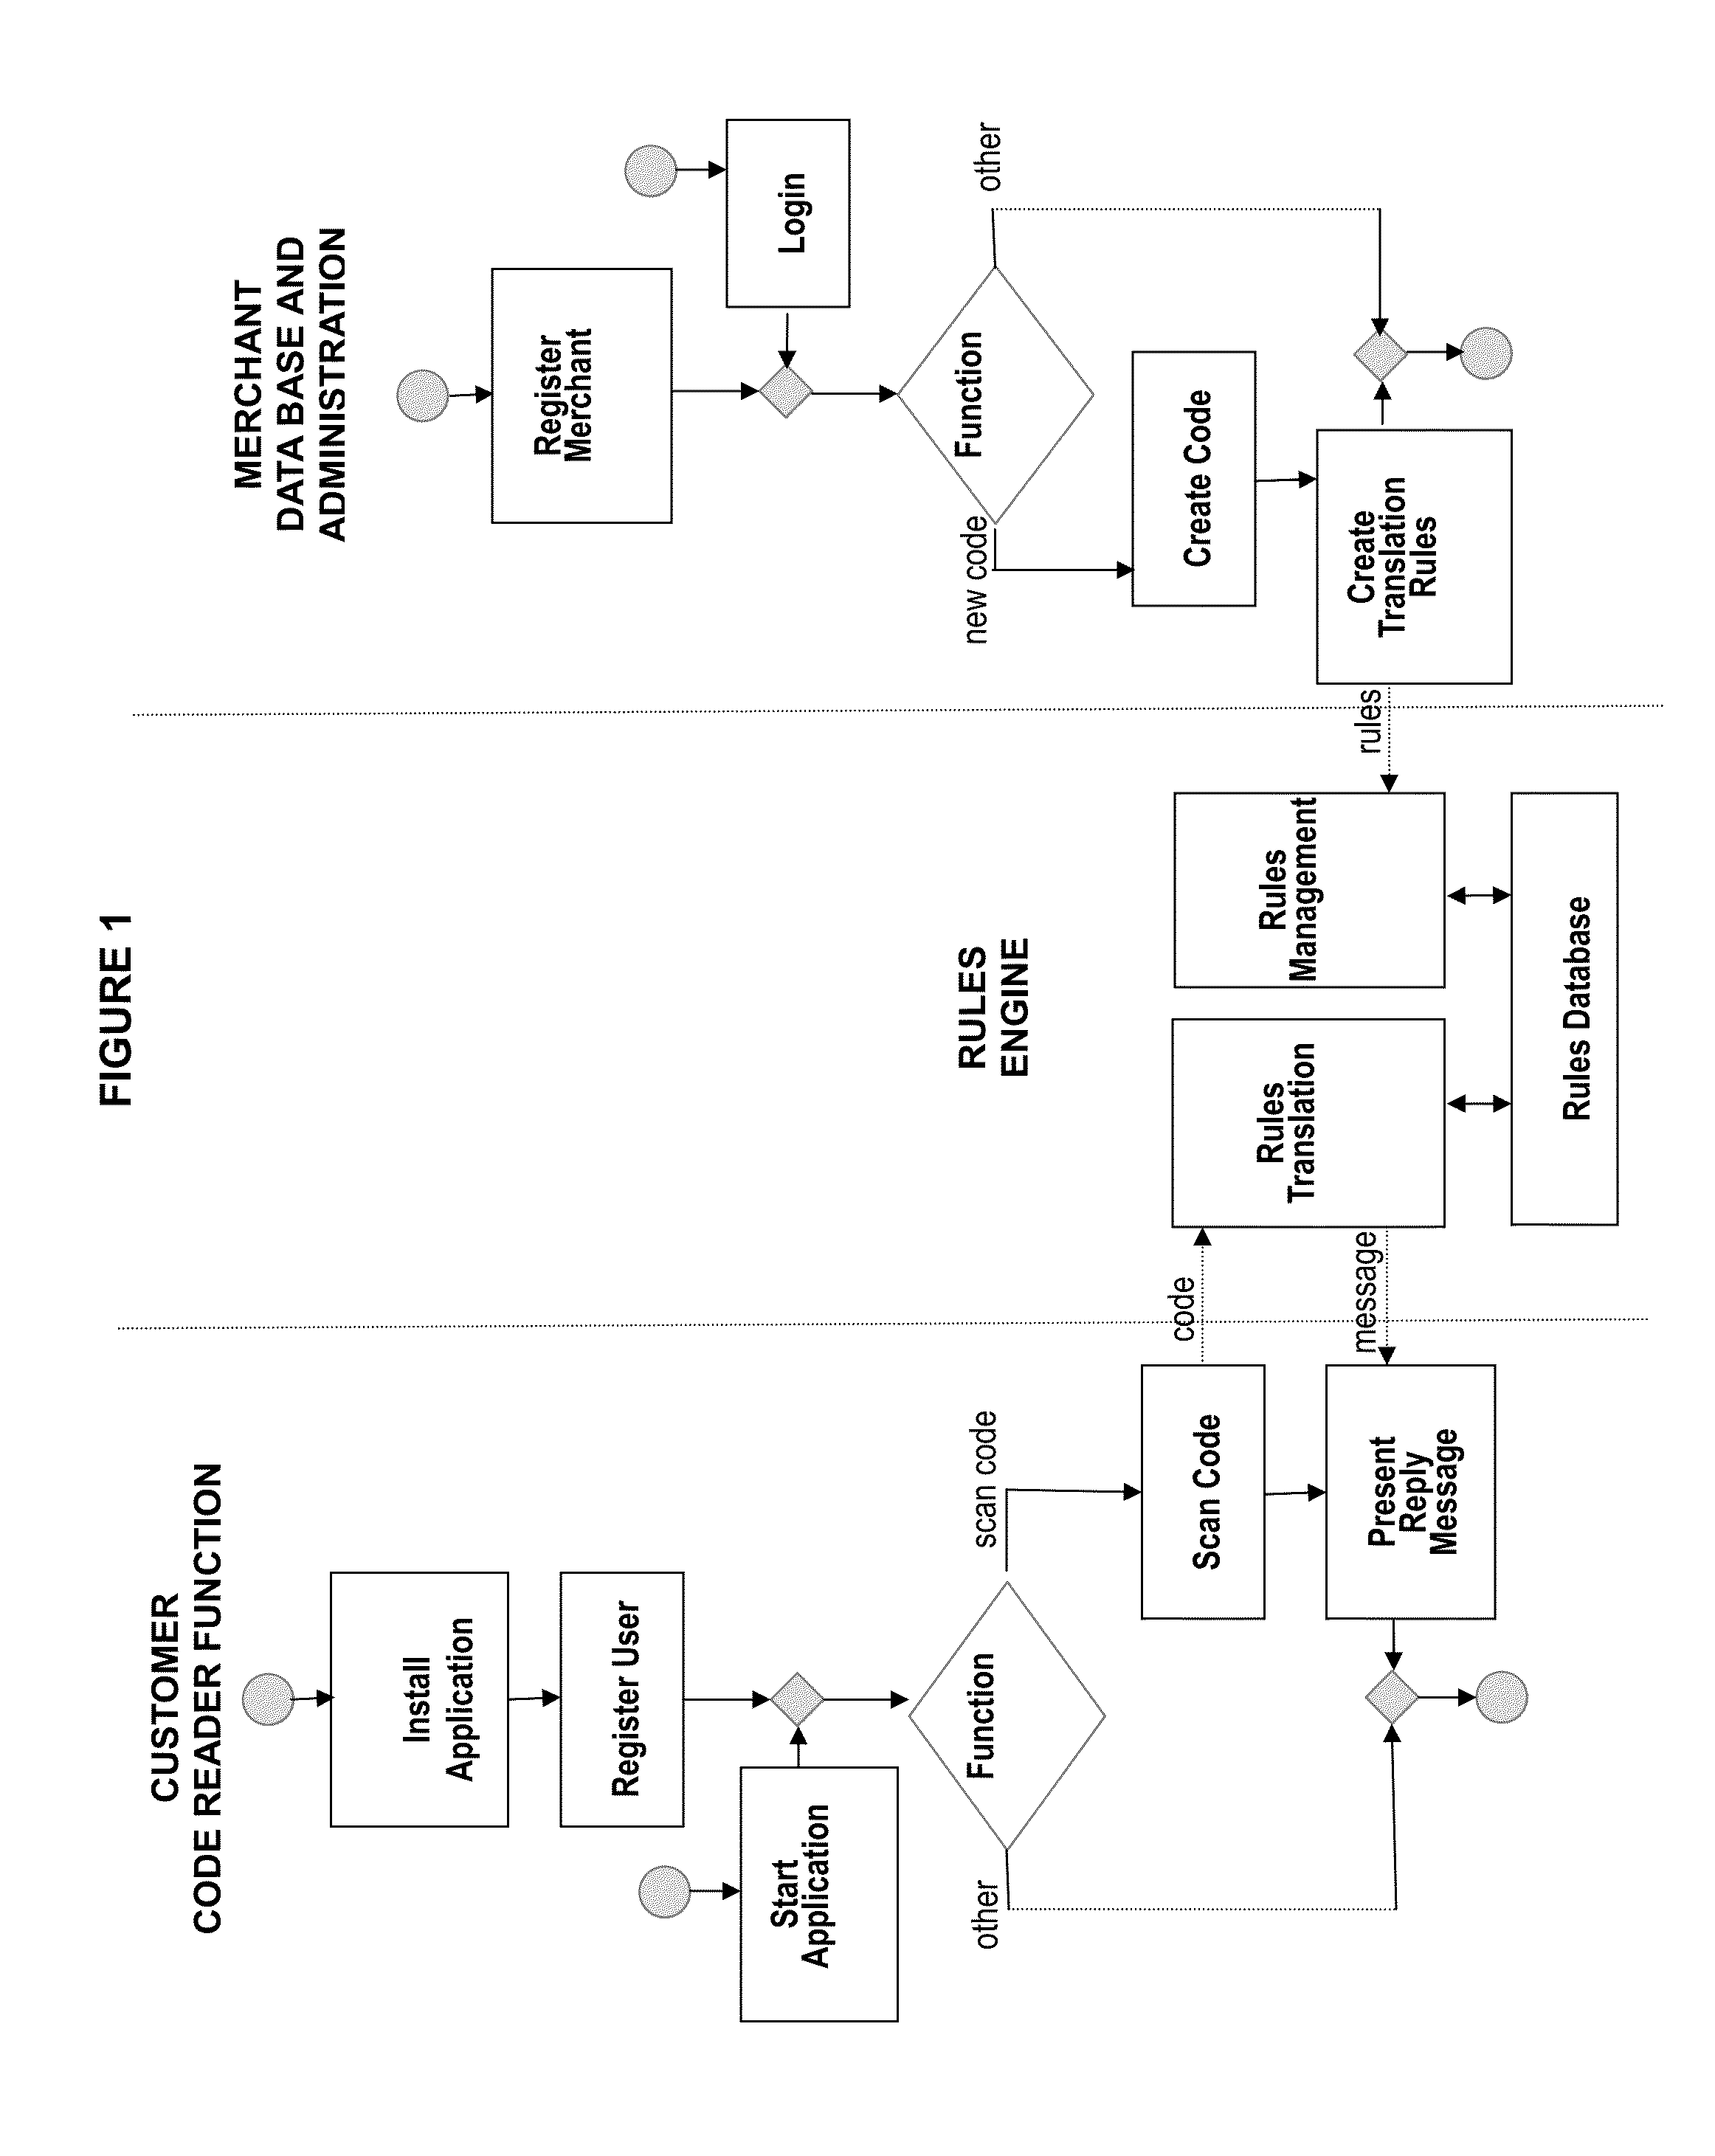 Interactive code processing platform providing interaction between parties generating and disseminating single and multidimensional optical and digital codes